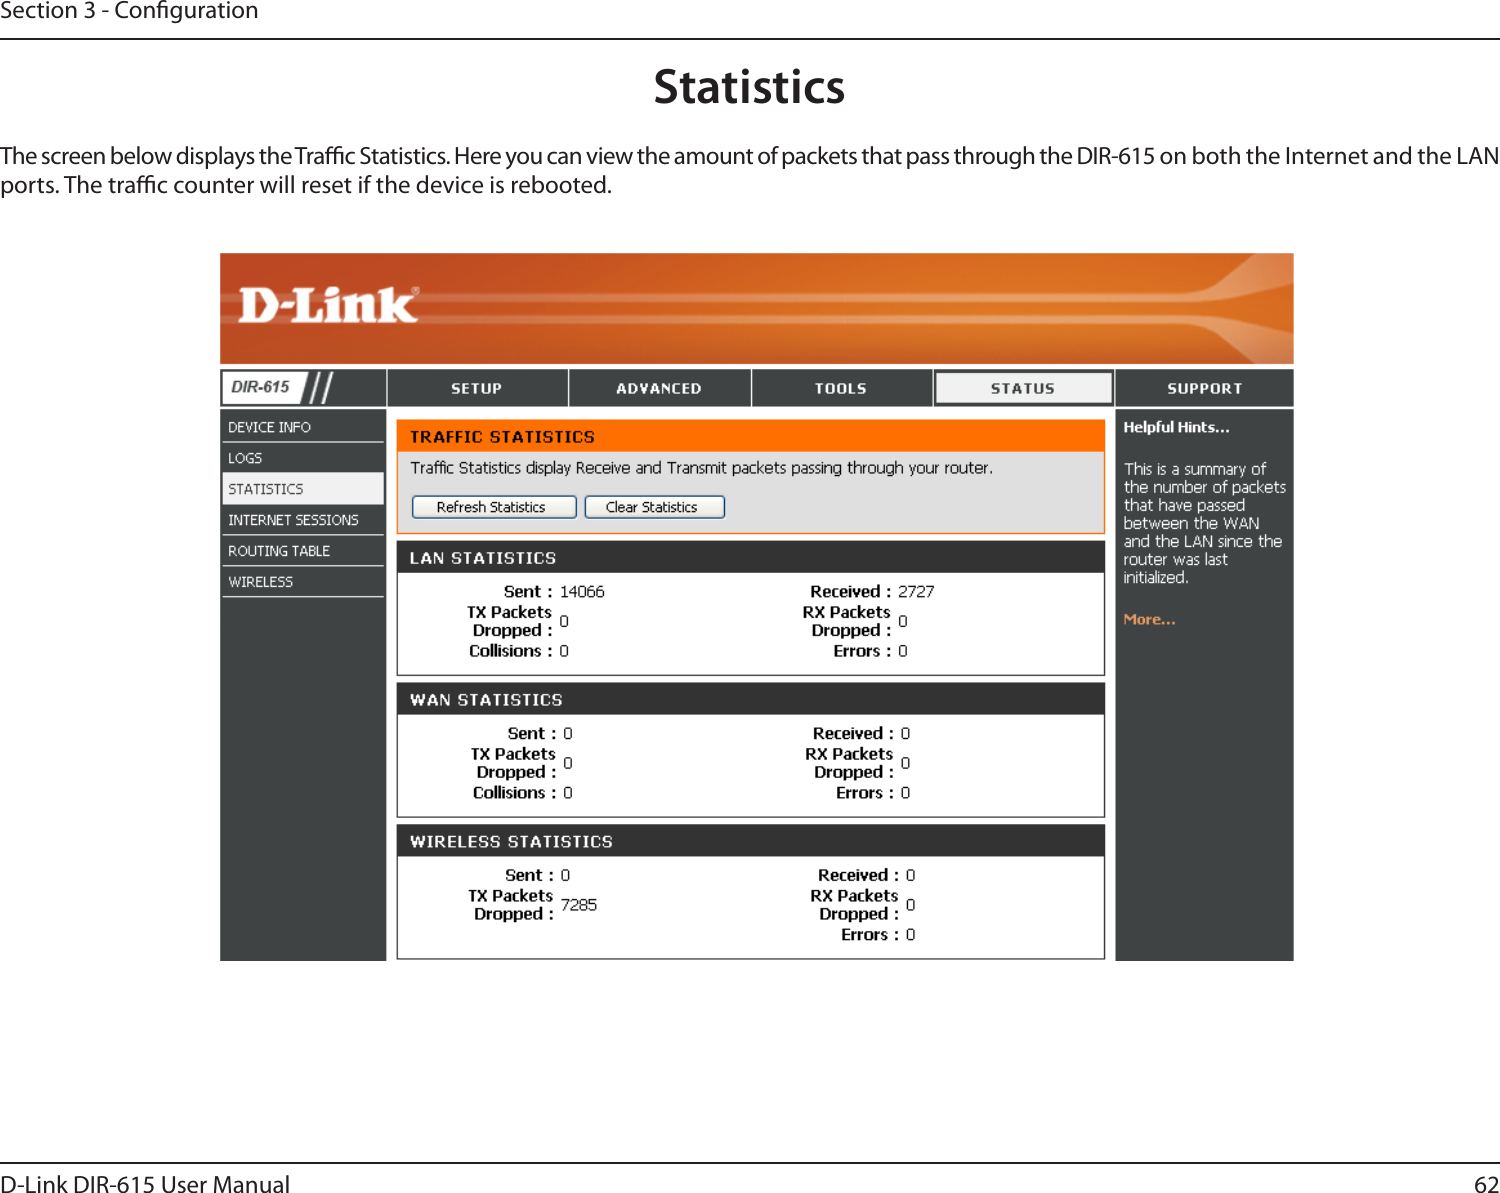 62D-Link DIR-615 User ManualSection 3 - CongurationStatisticsThe screen below displays the Trac Statistics. Here you can view the amount of packets that pass through the DIR-615 on both the Internet and the LAN ports. The trac counter will reset if the device is rebooted.